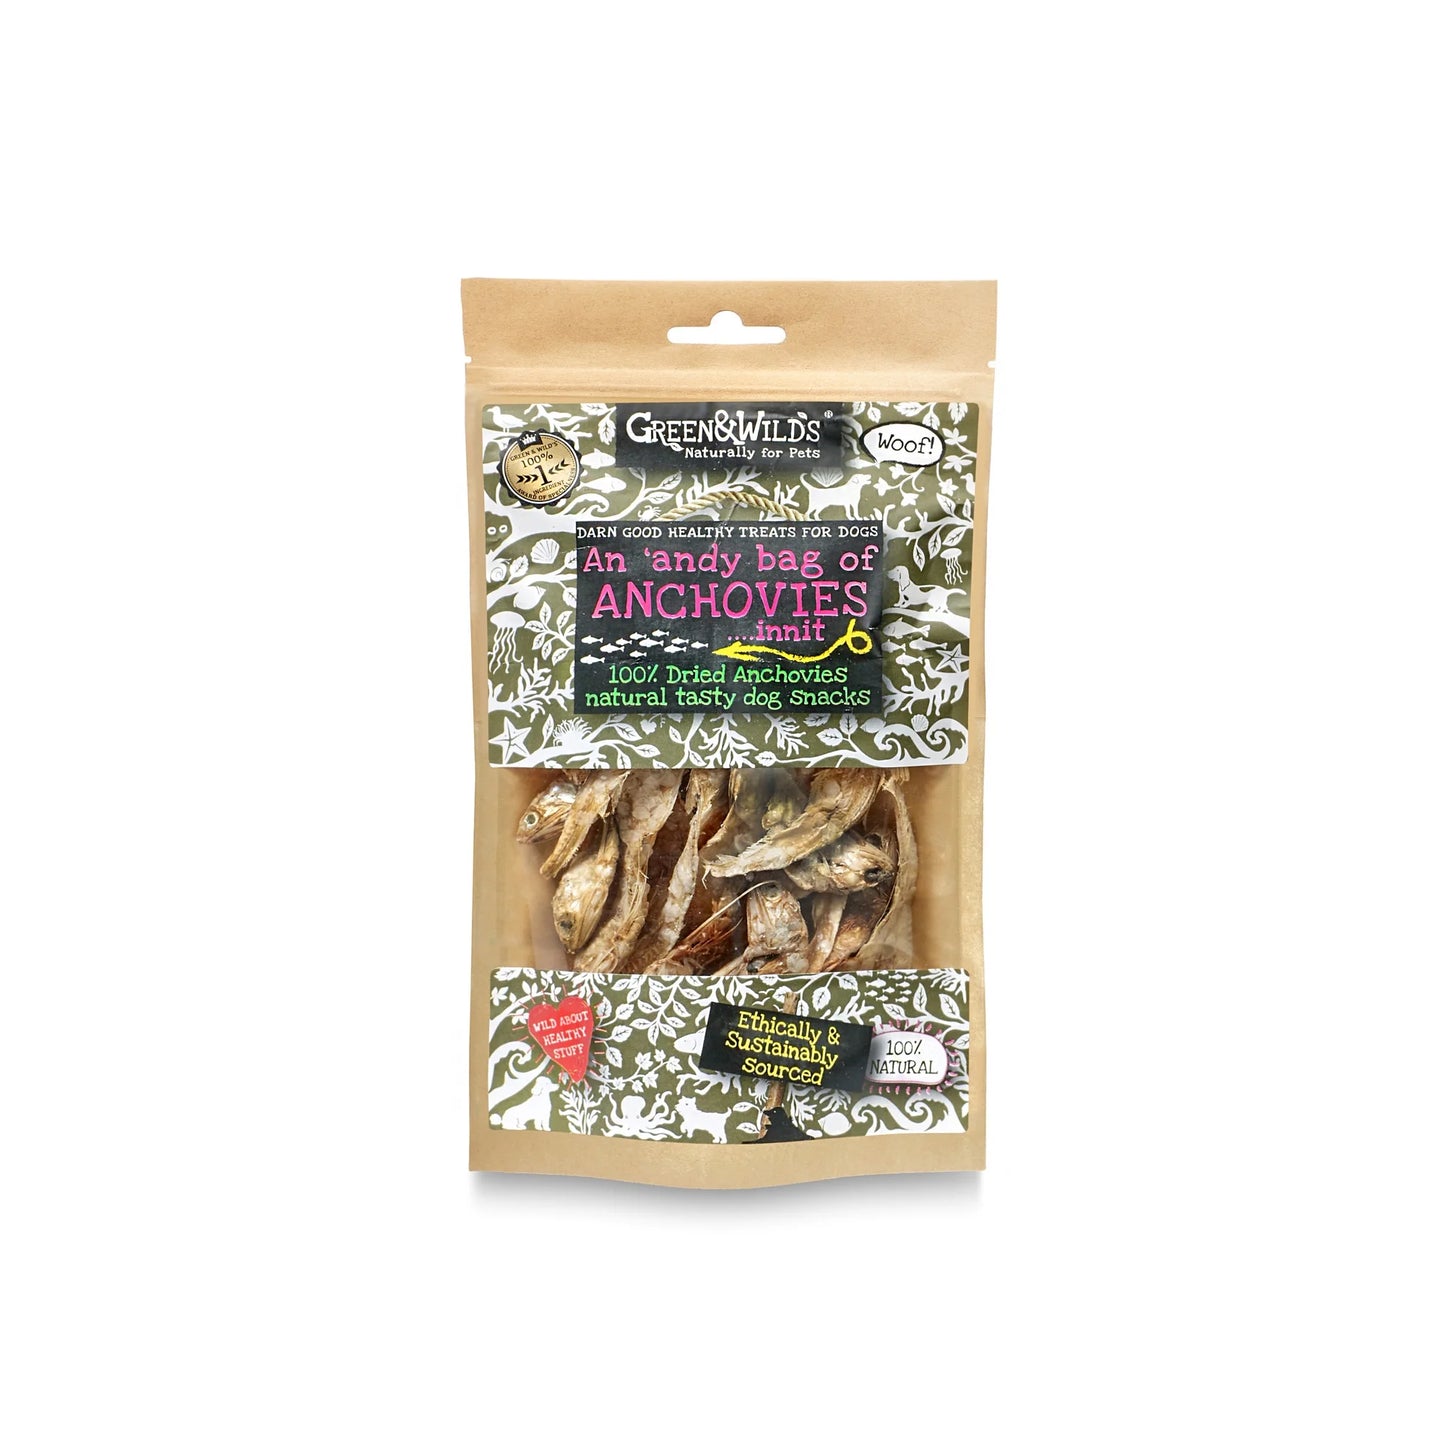 Green & Wilds 'Andy Bag of Anchovies, 50g Dog Treats